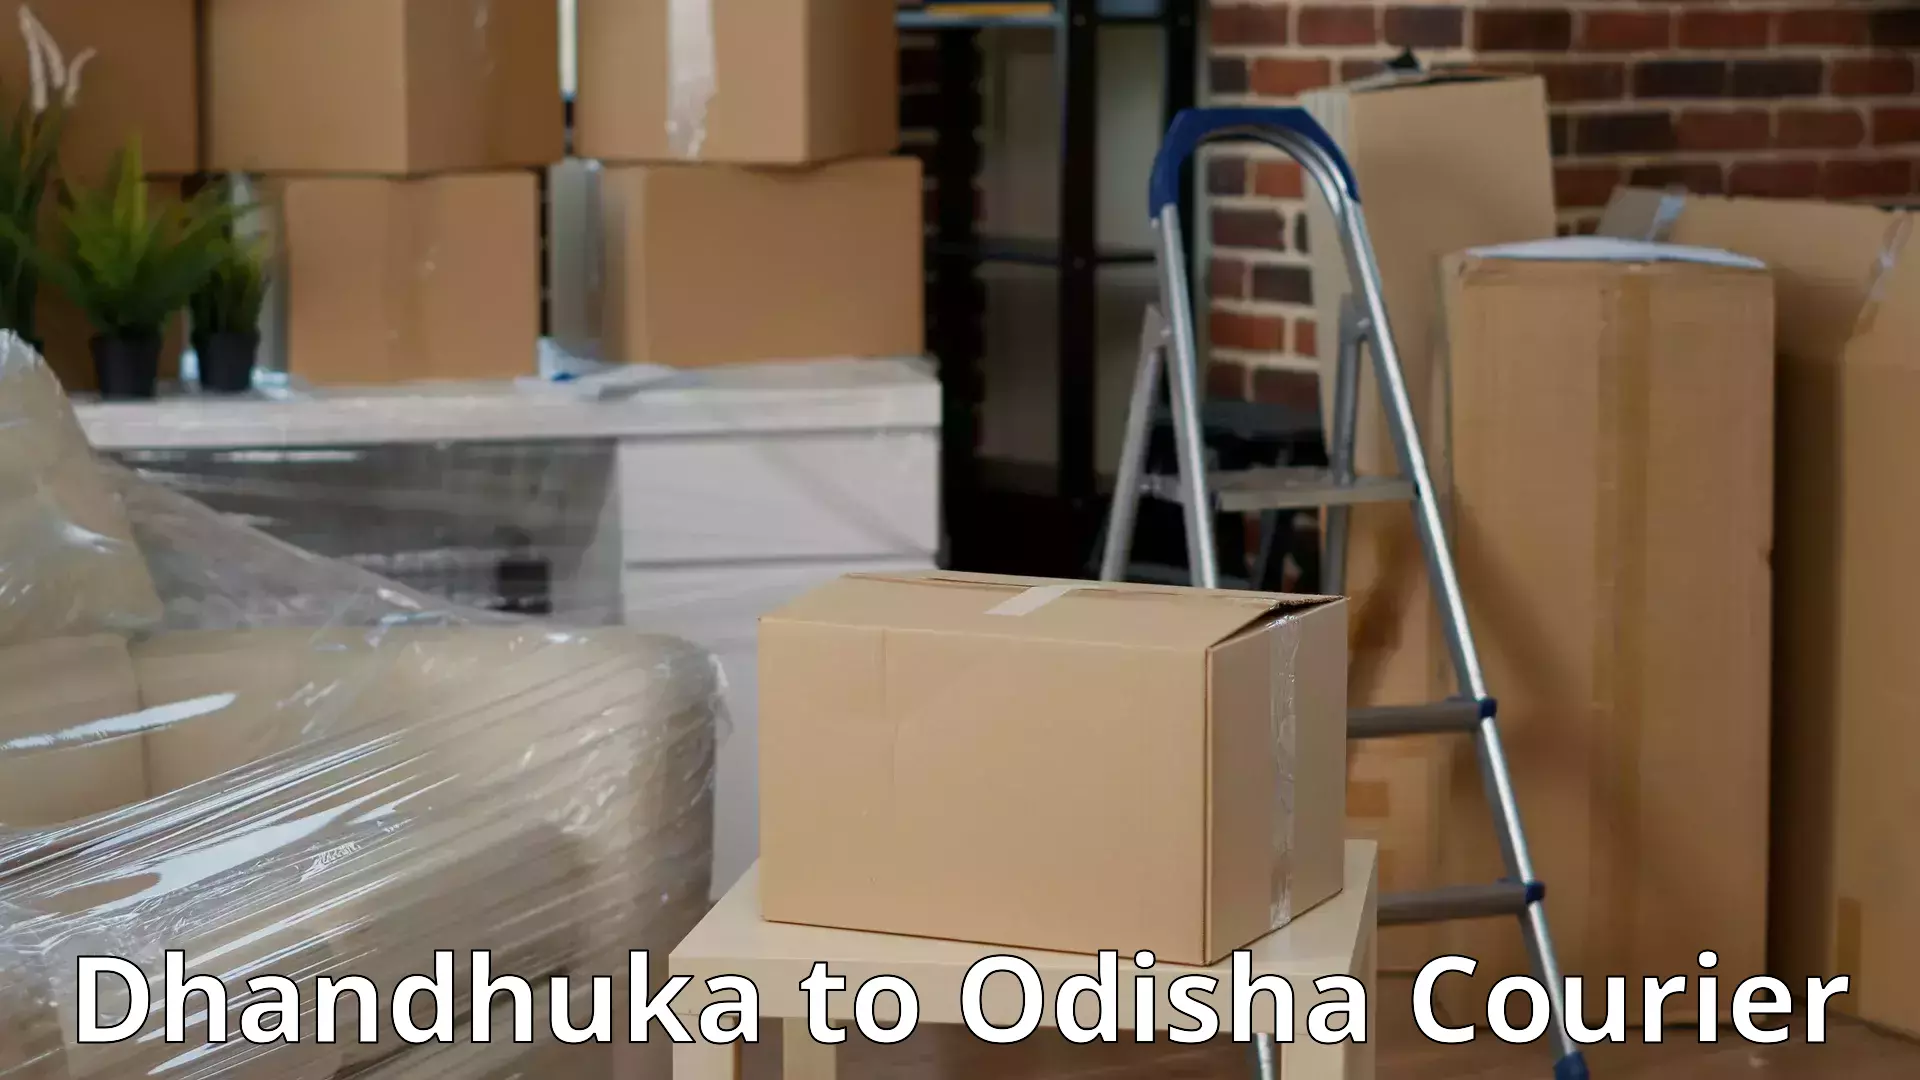 Quality relocation services Dhandhuka to Chandipur